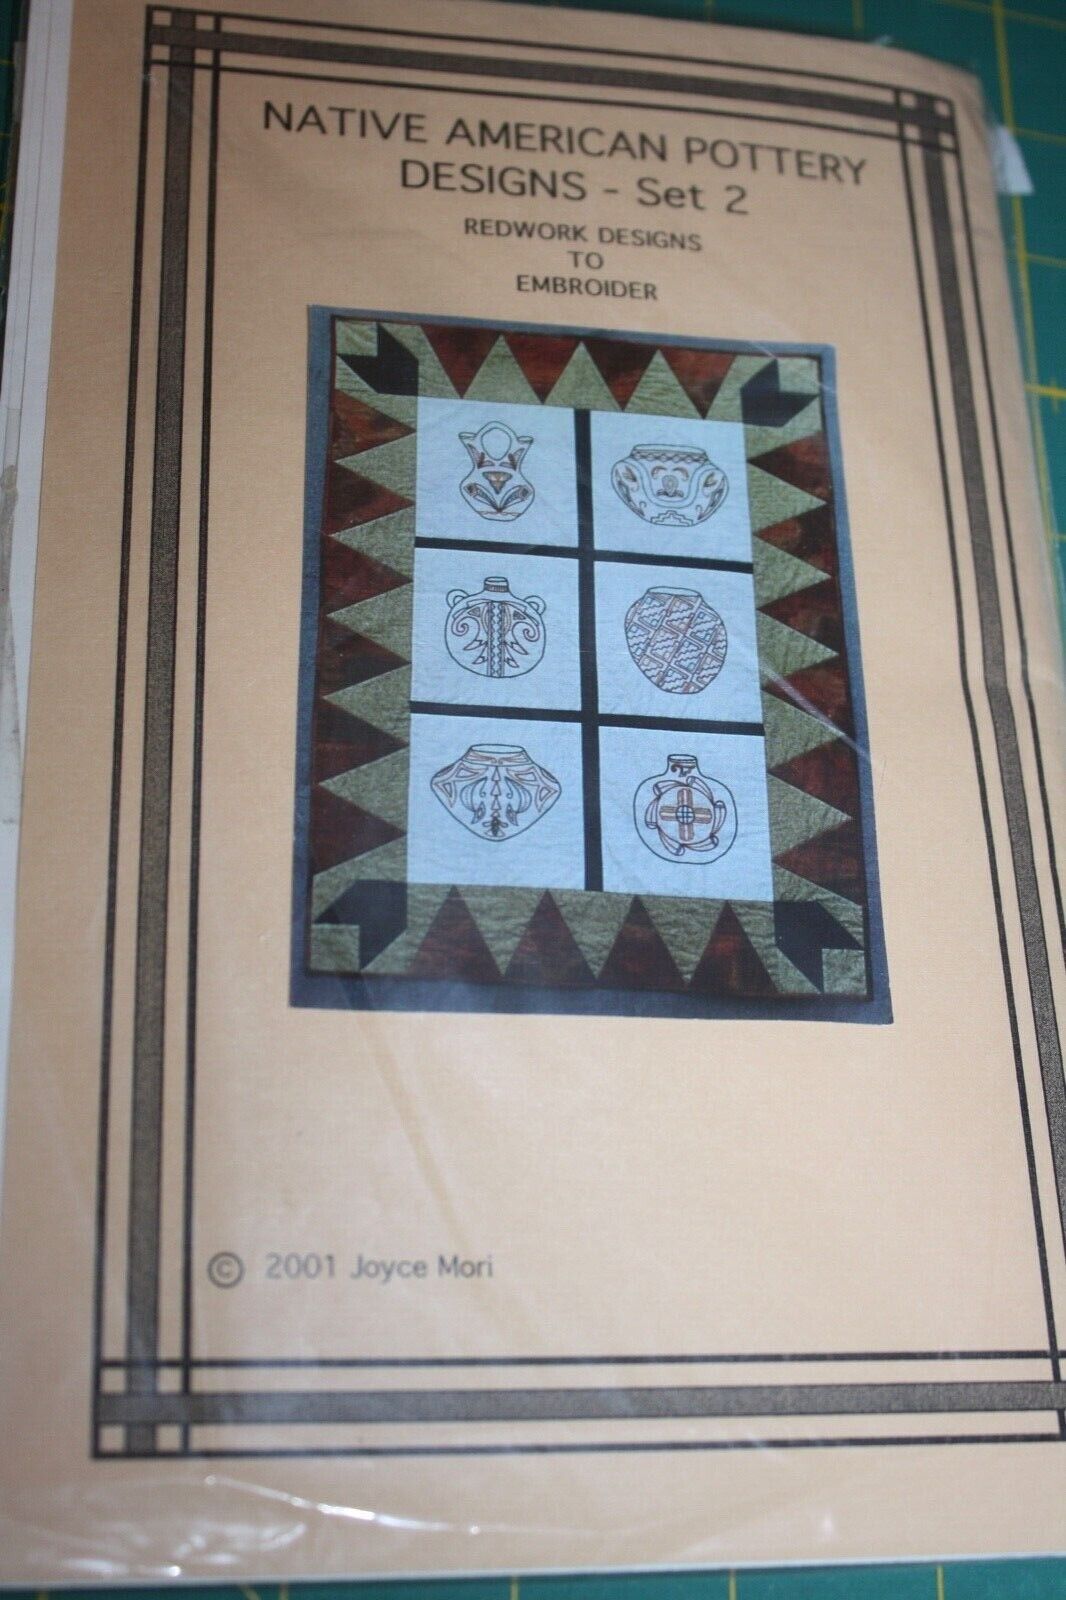 2001 Native American Pottery Designs Set 2, Redwork Designs Embroidery Pattern